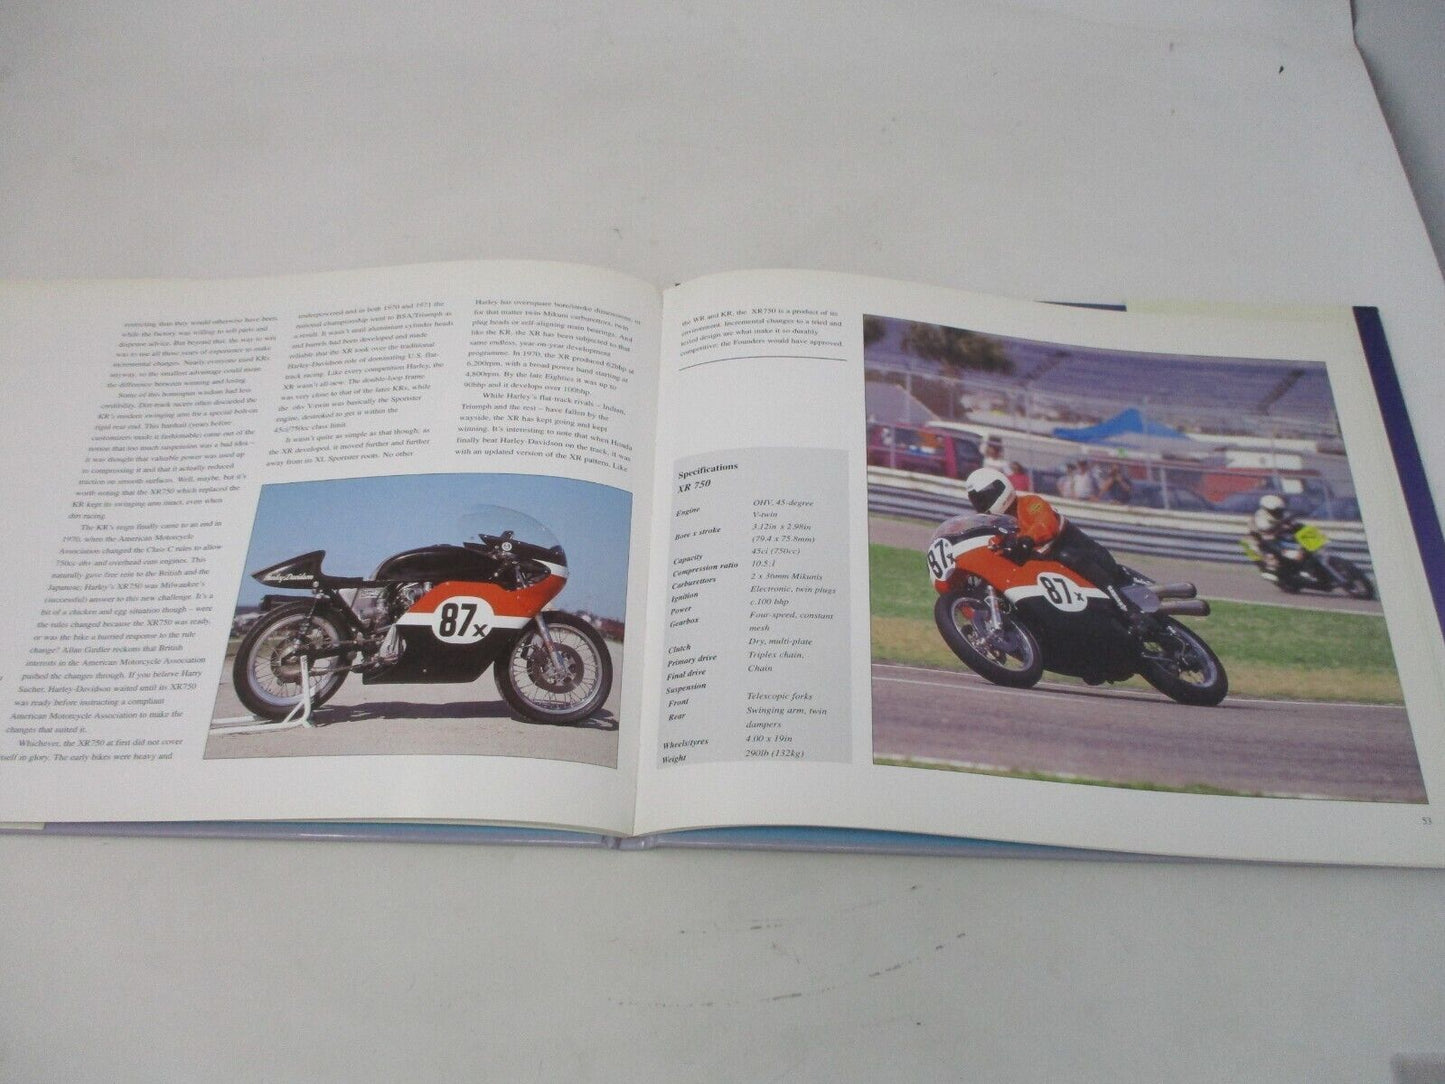 The Best of Harley-Davidson by Peter Henshaw 1996